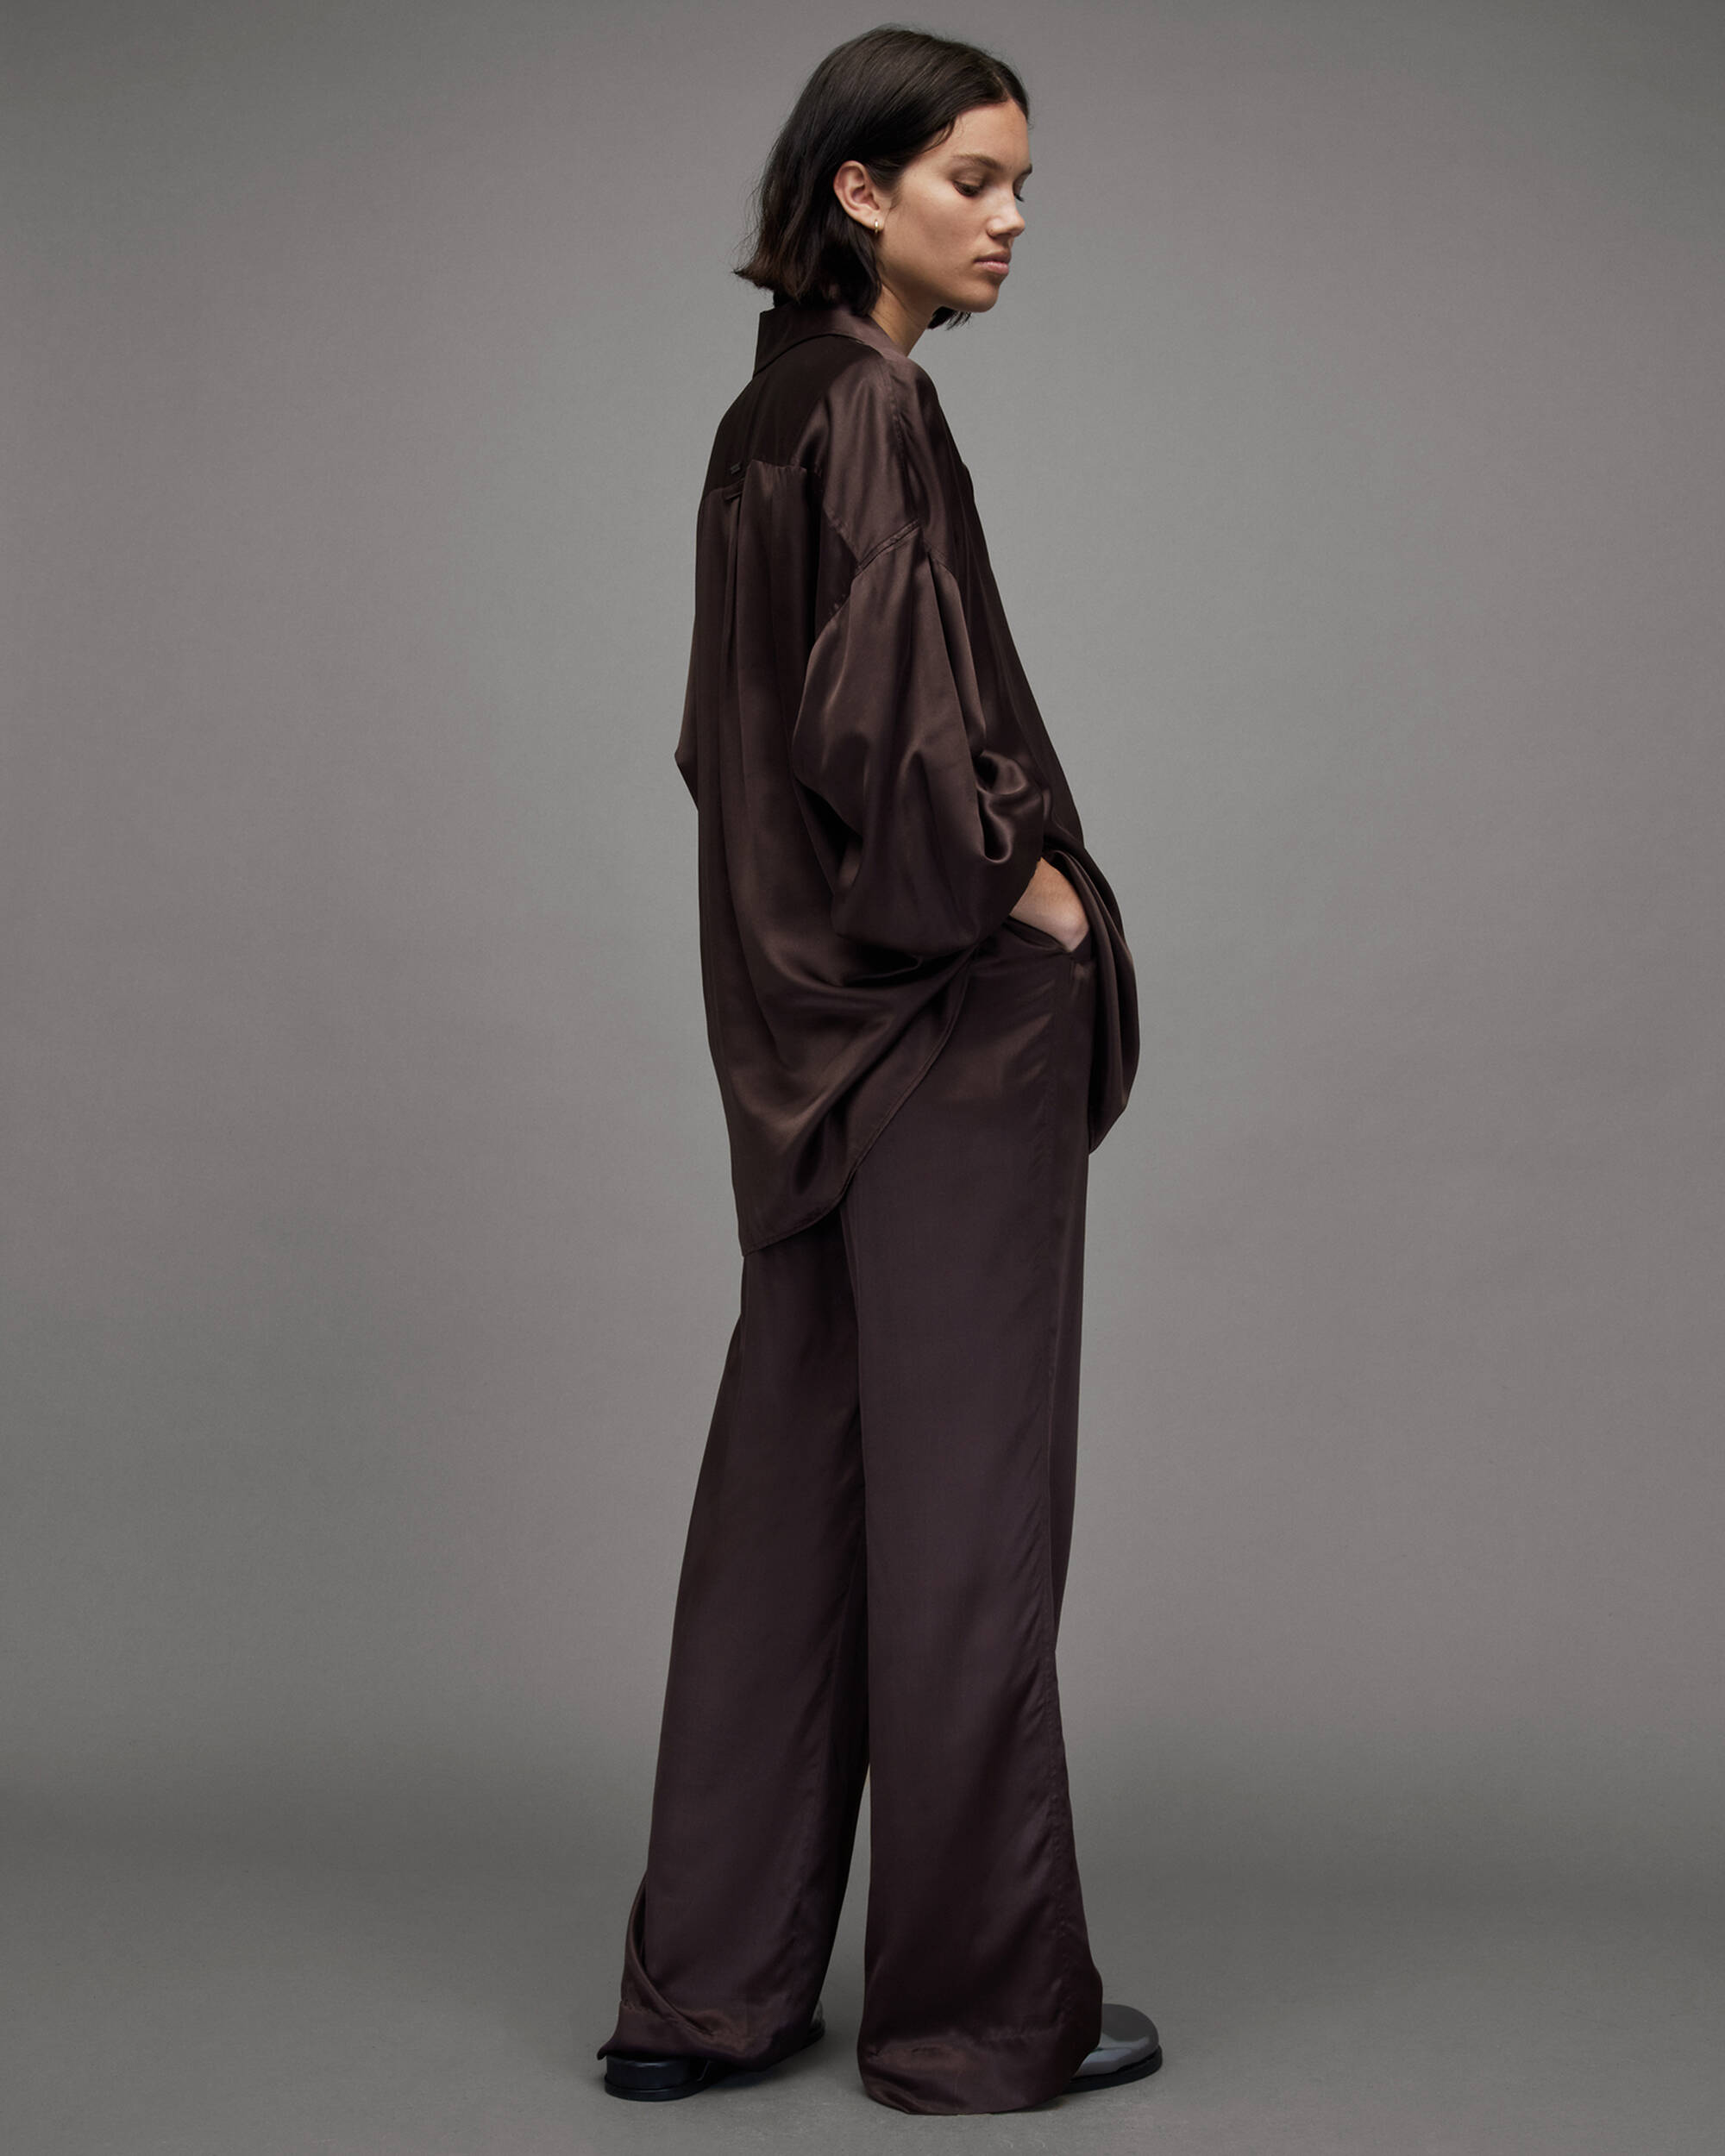 Charli Silk Blend Wide Leg Fit Trousers WARM CACAO BROWN | ALLSAINTS